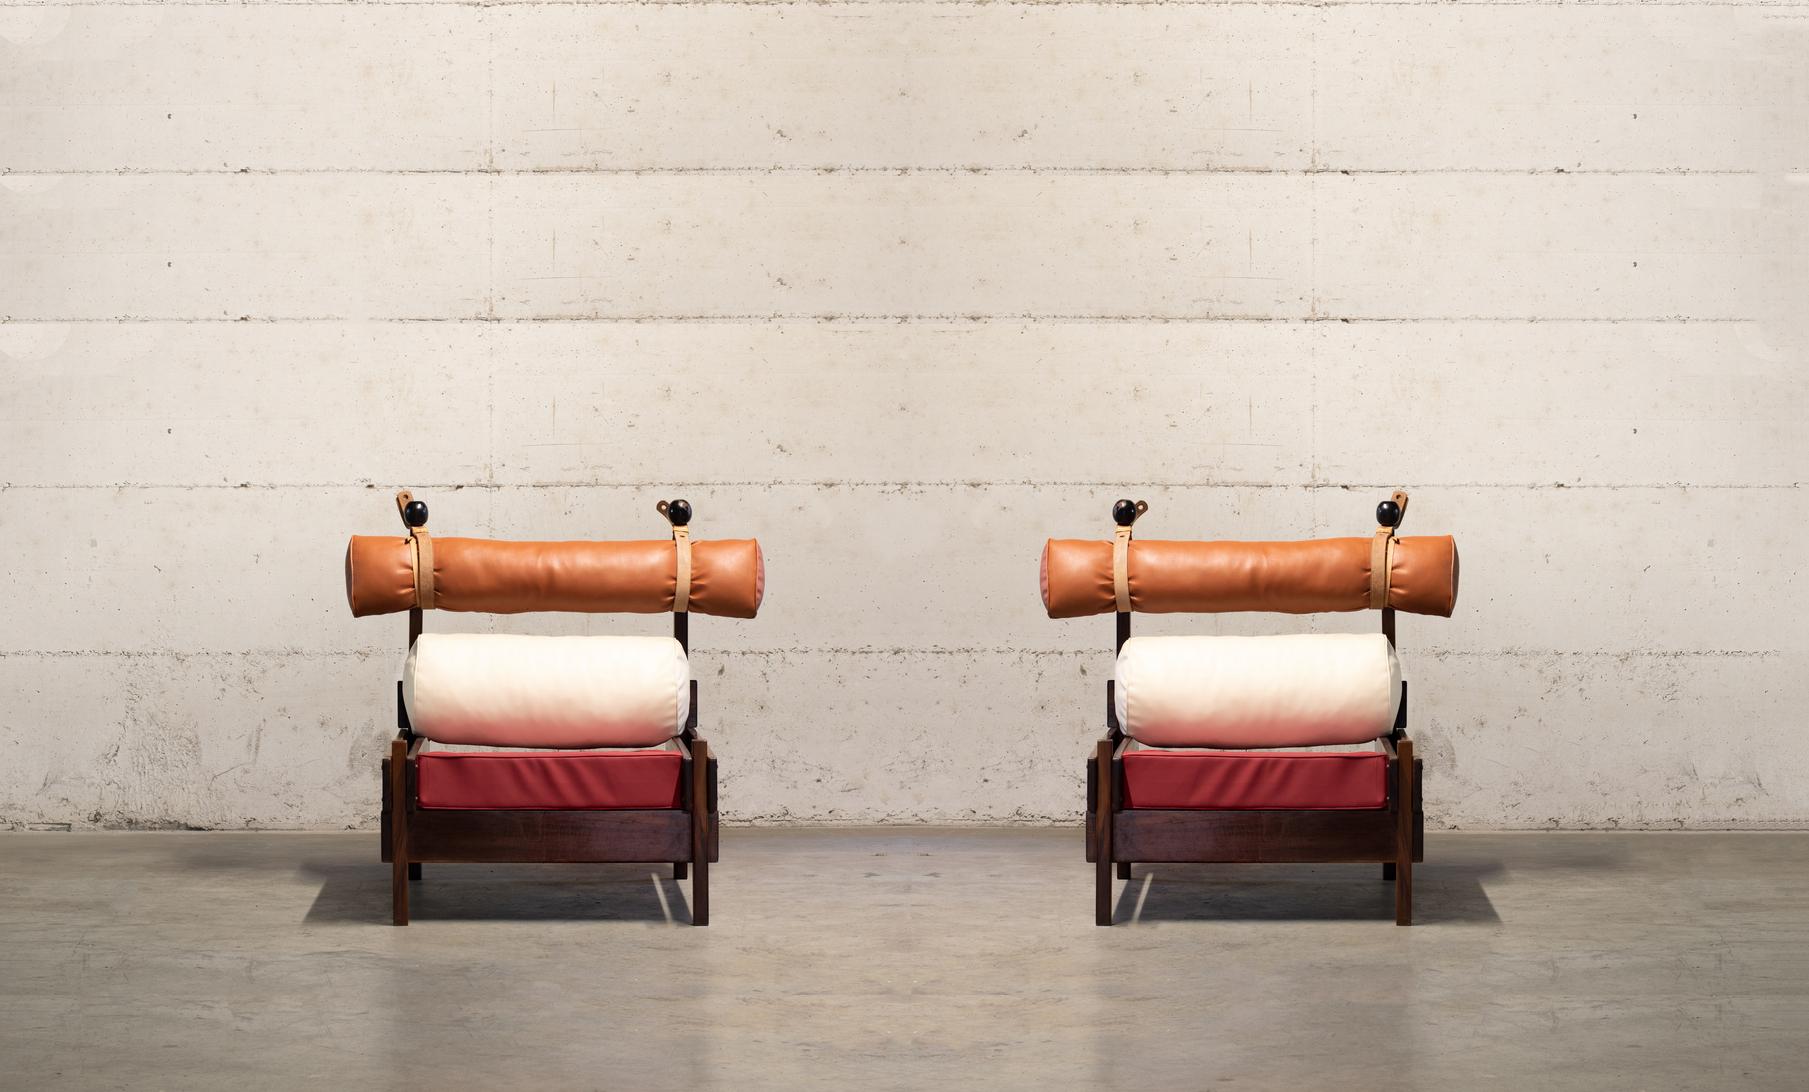 Pair of ‘Tonico’ chairs by Sergio Rodrigues
Hardwood, seat upholstered in red leather, back in white leather, headrest cushion brown leather held in place by adjustment straps.
Manufactured in Brazil, 1960s.
Measures: width 100 x depth 80 x